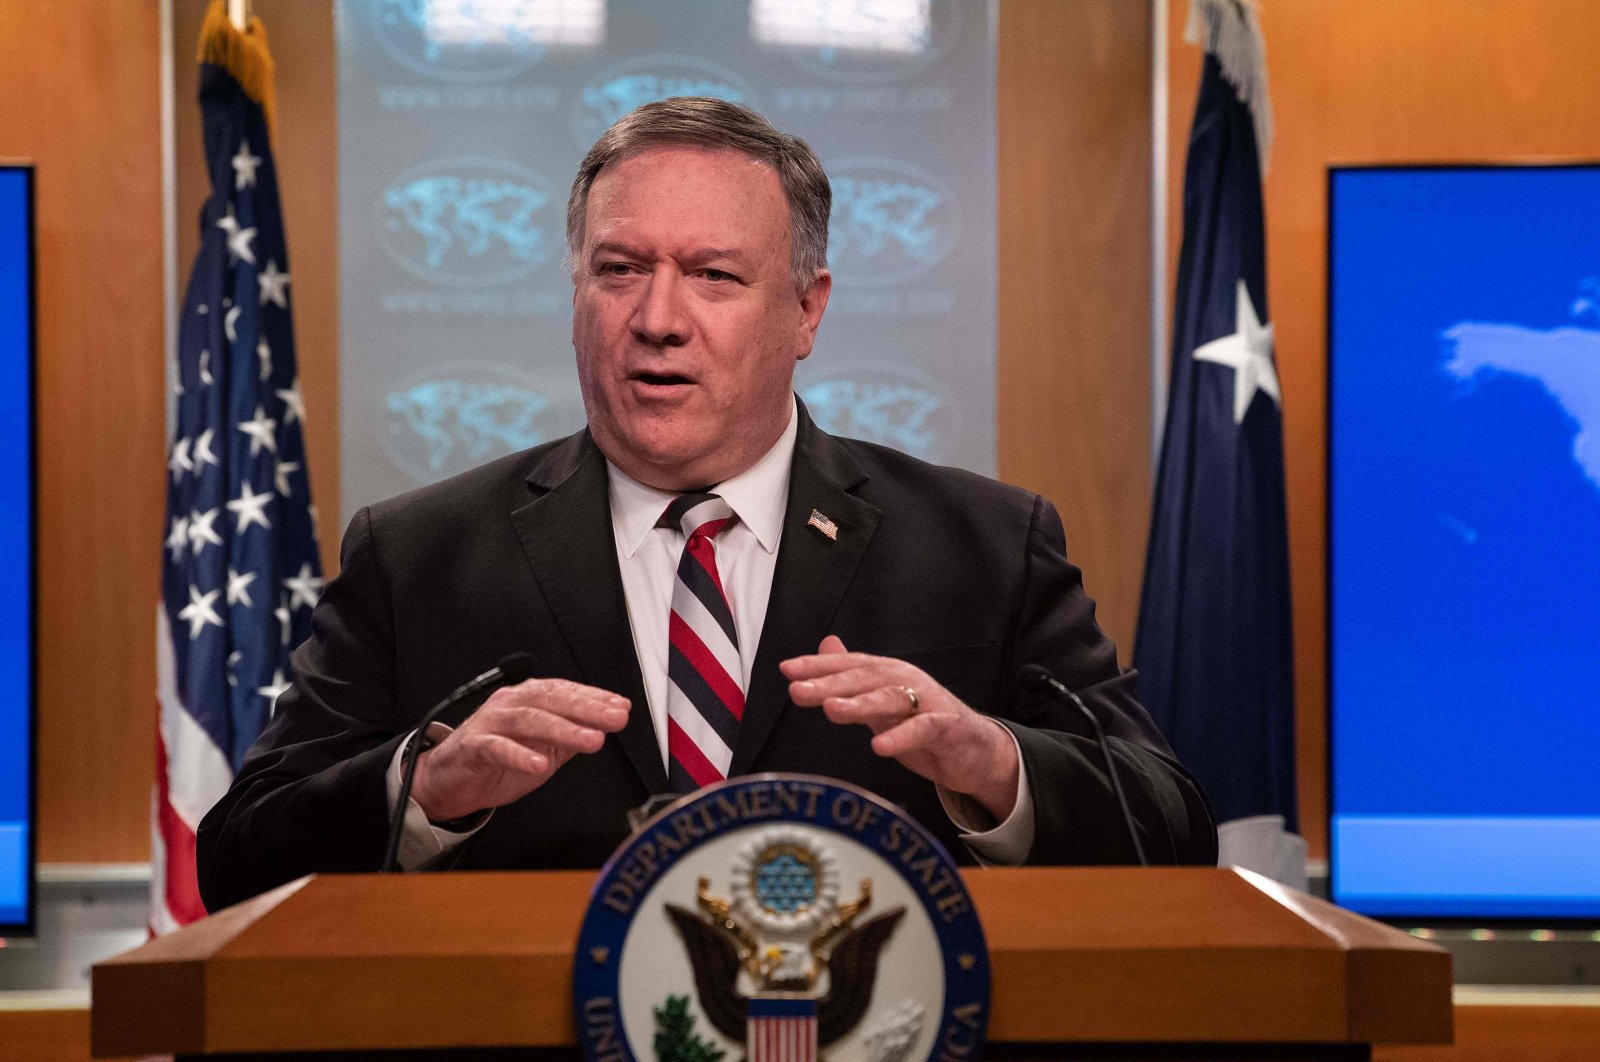 US Secretary of State Mike Pompeo announced sanctions on Syrian regime officials during a press conference at the State Department in Washington DC, on March 17, 2020. (AFP Photo)